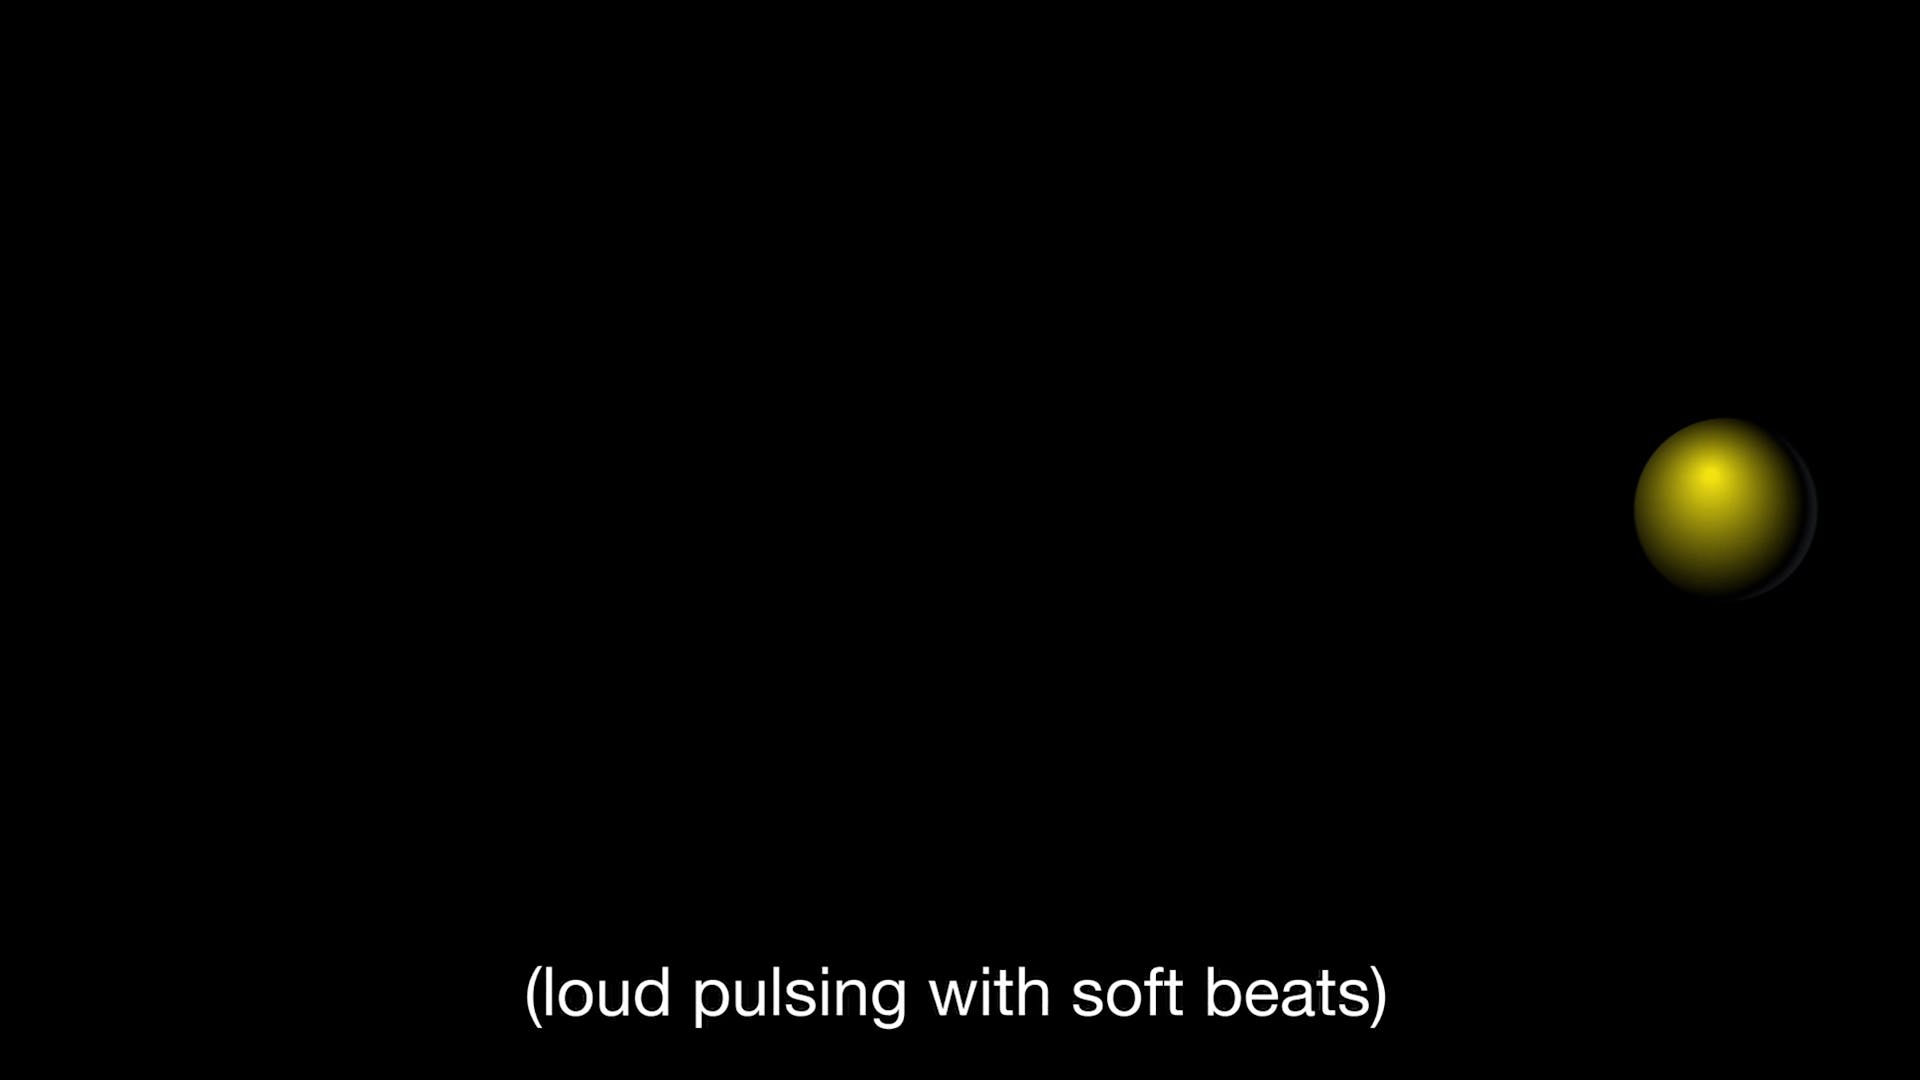 Black screen with small yellow sphere on right side and subtitle that says "(loud pulsing with soft beats)"